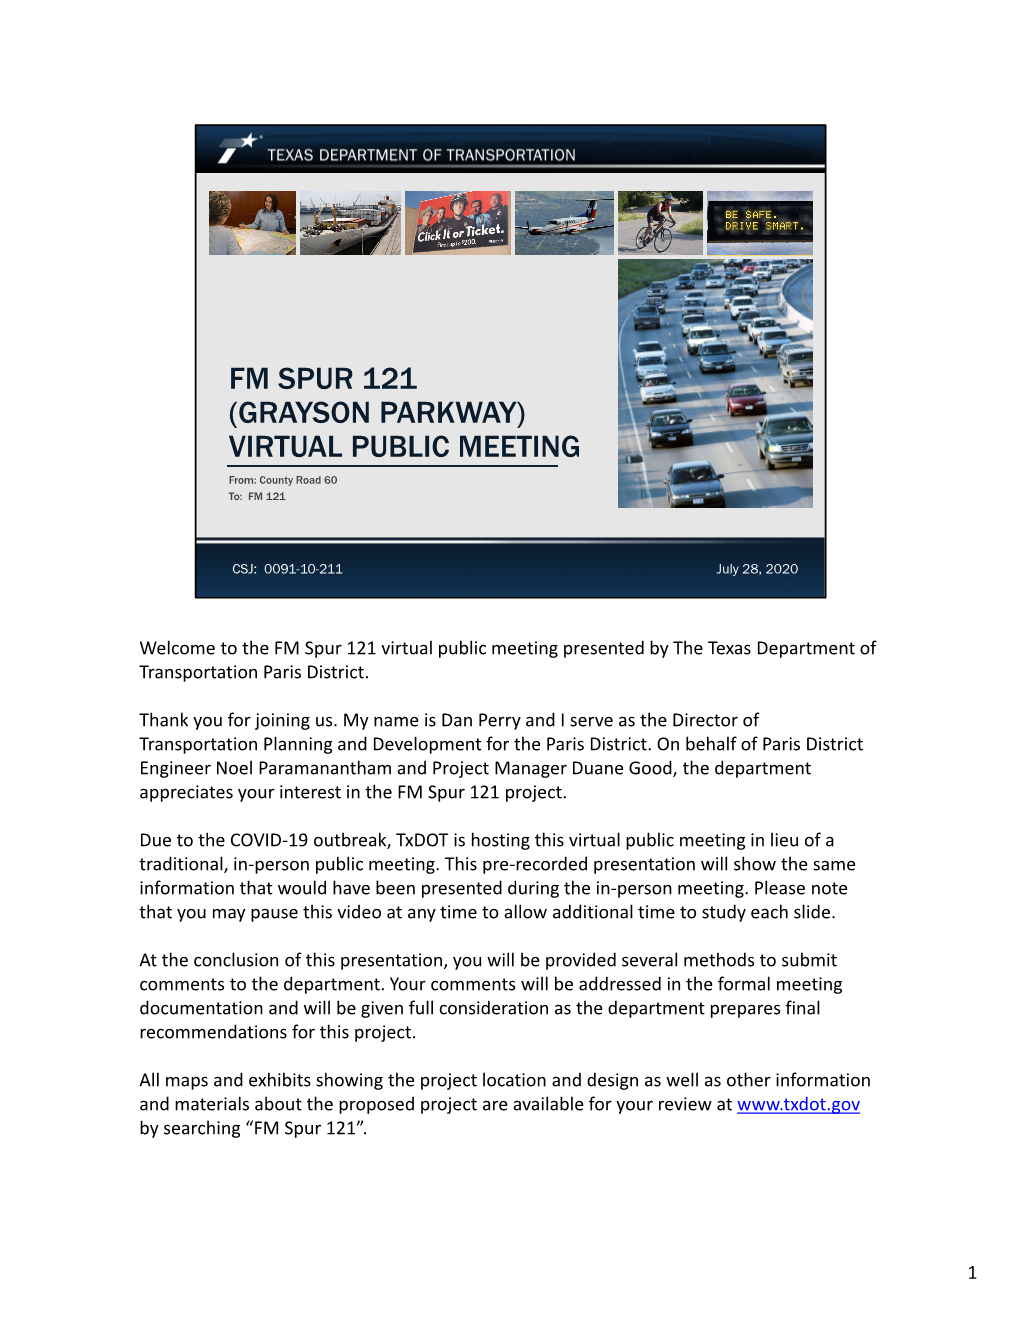 FM SPUR 121 (GRAYSON PARKWAY) VIRTUAL PUBLIC MEETING From: County Road 60 To: FM 121